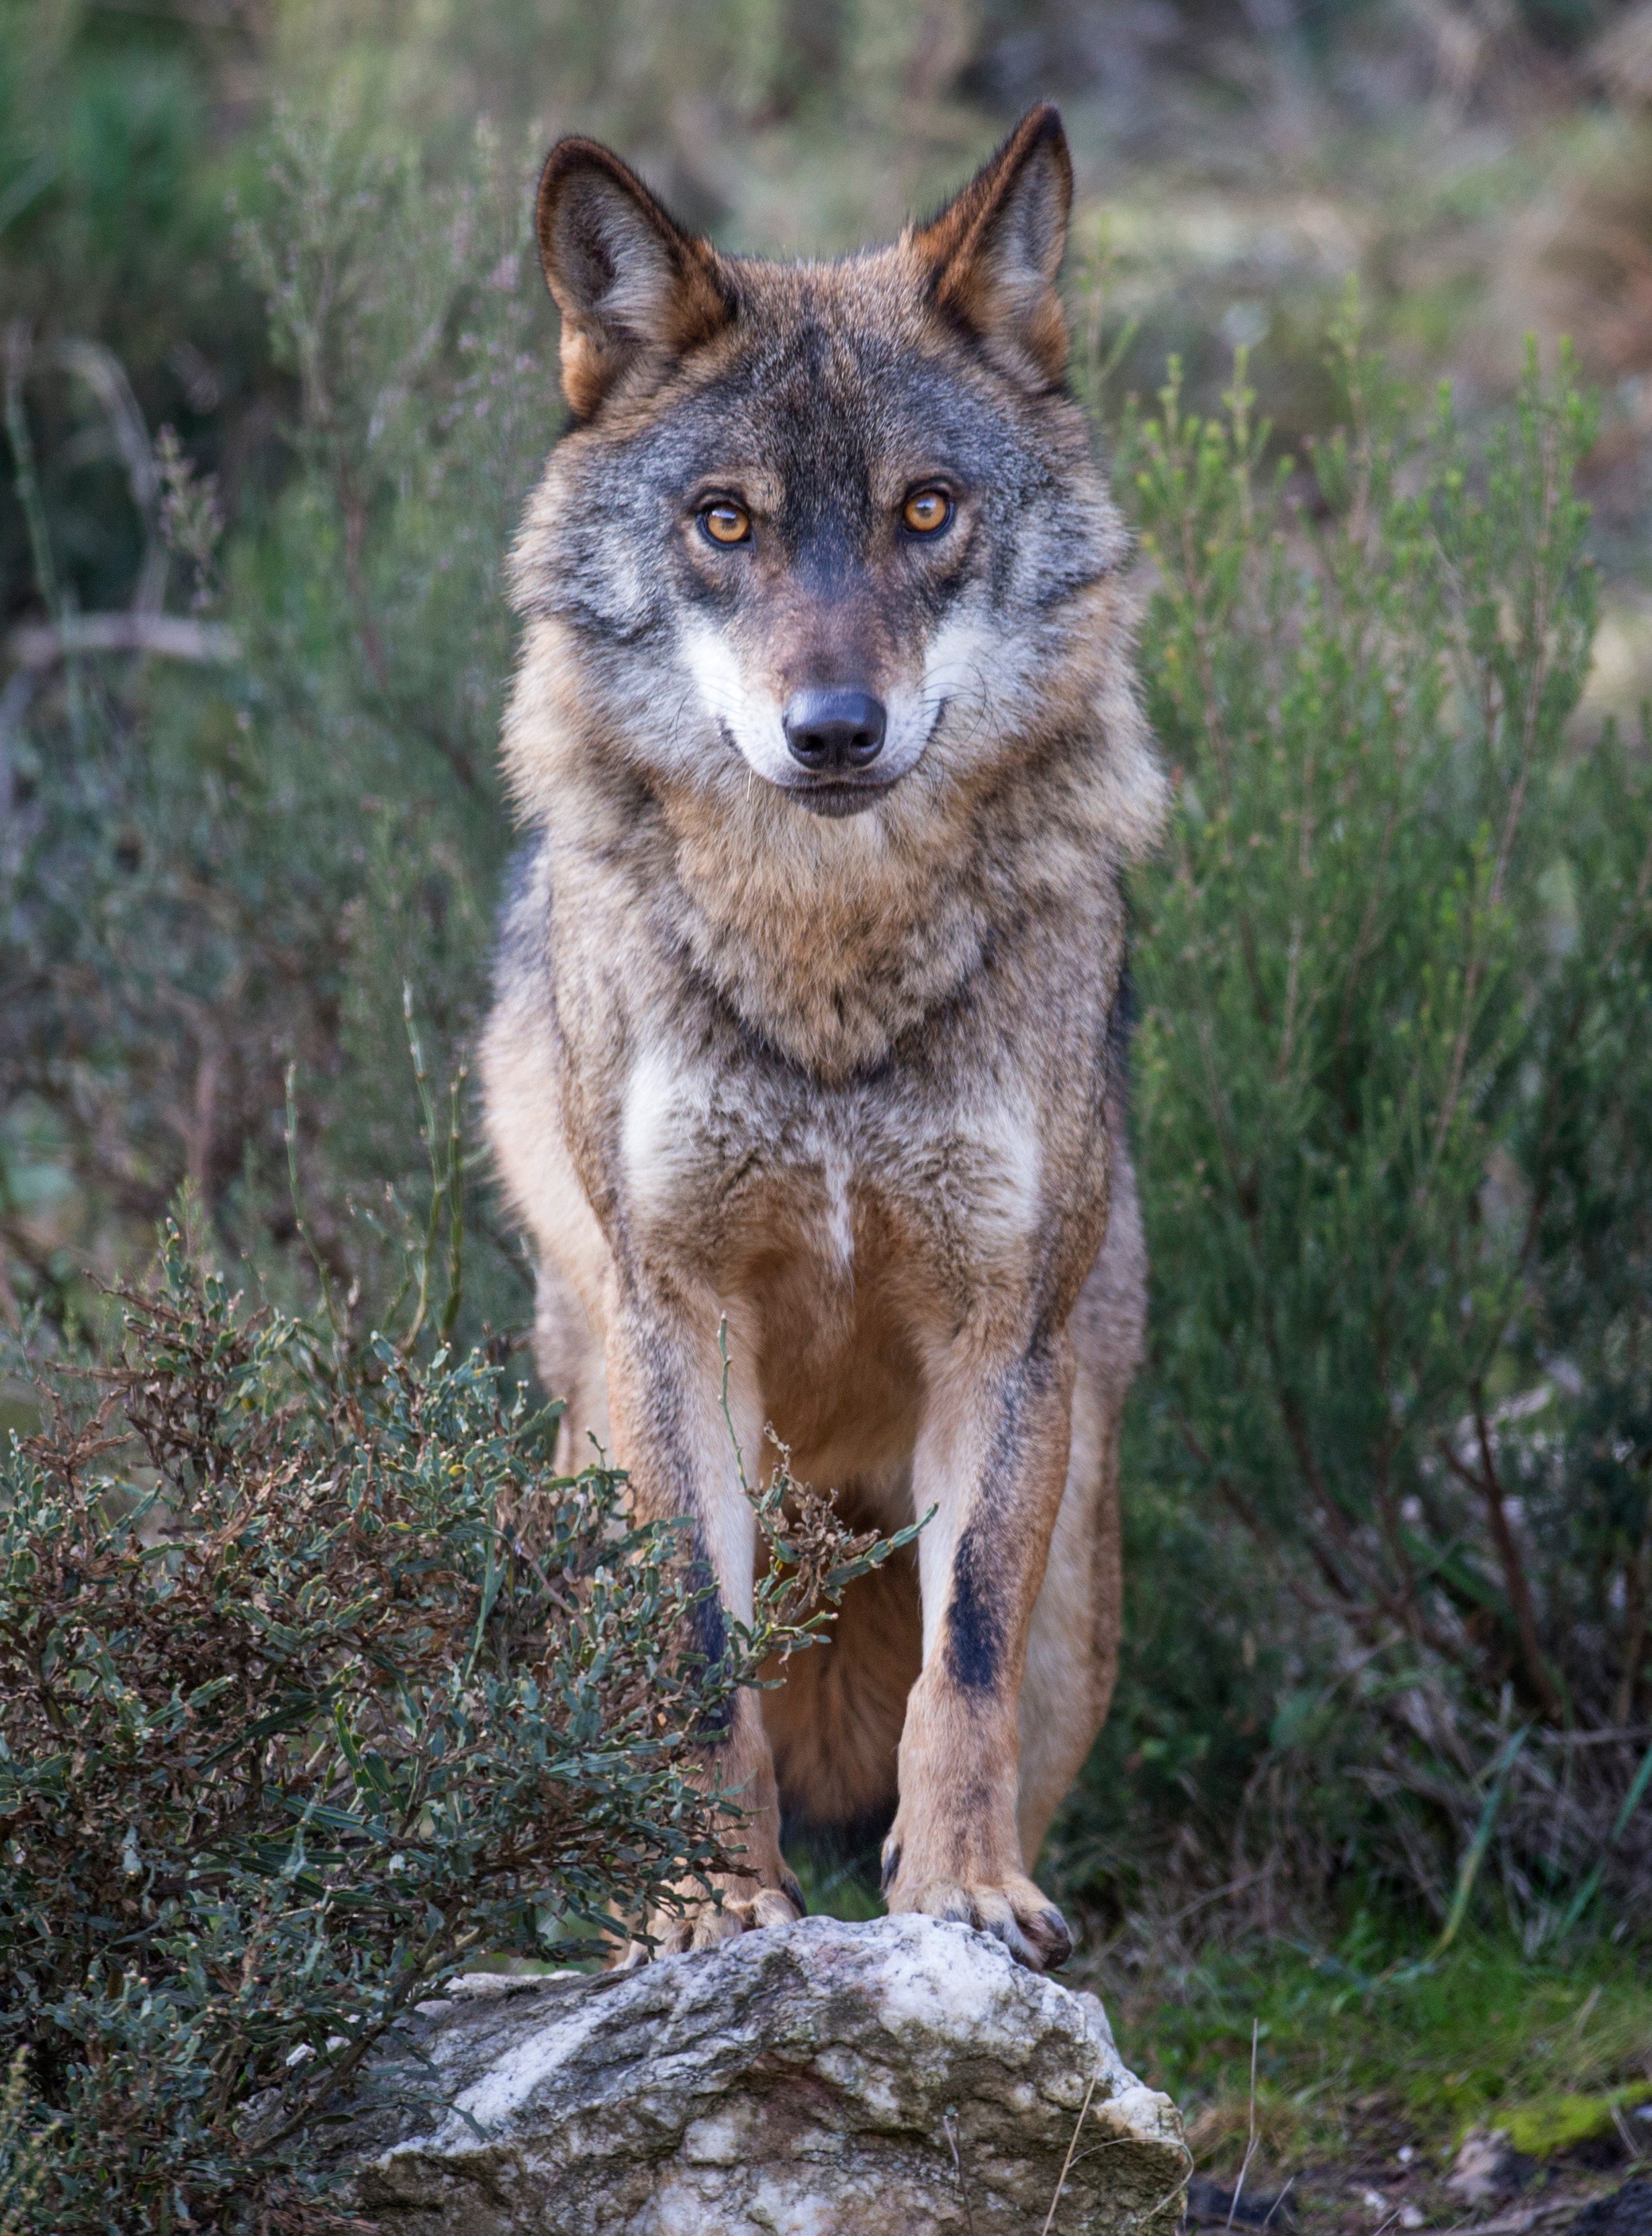 An Iberian wolf, the top predator in Portugal’s Greater Côa Valley and the focus of ongoing human-wildlife coexistence efforts that could boost the area’s nature-tourism income. Photo: Daniel Allen